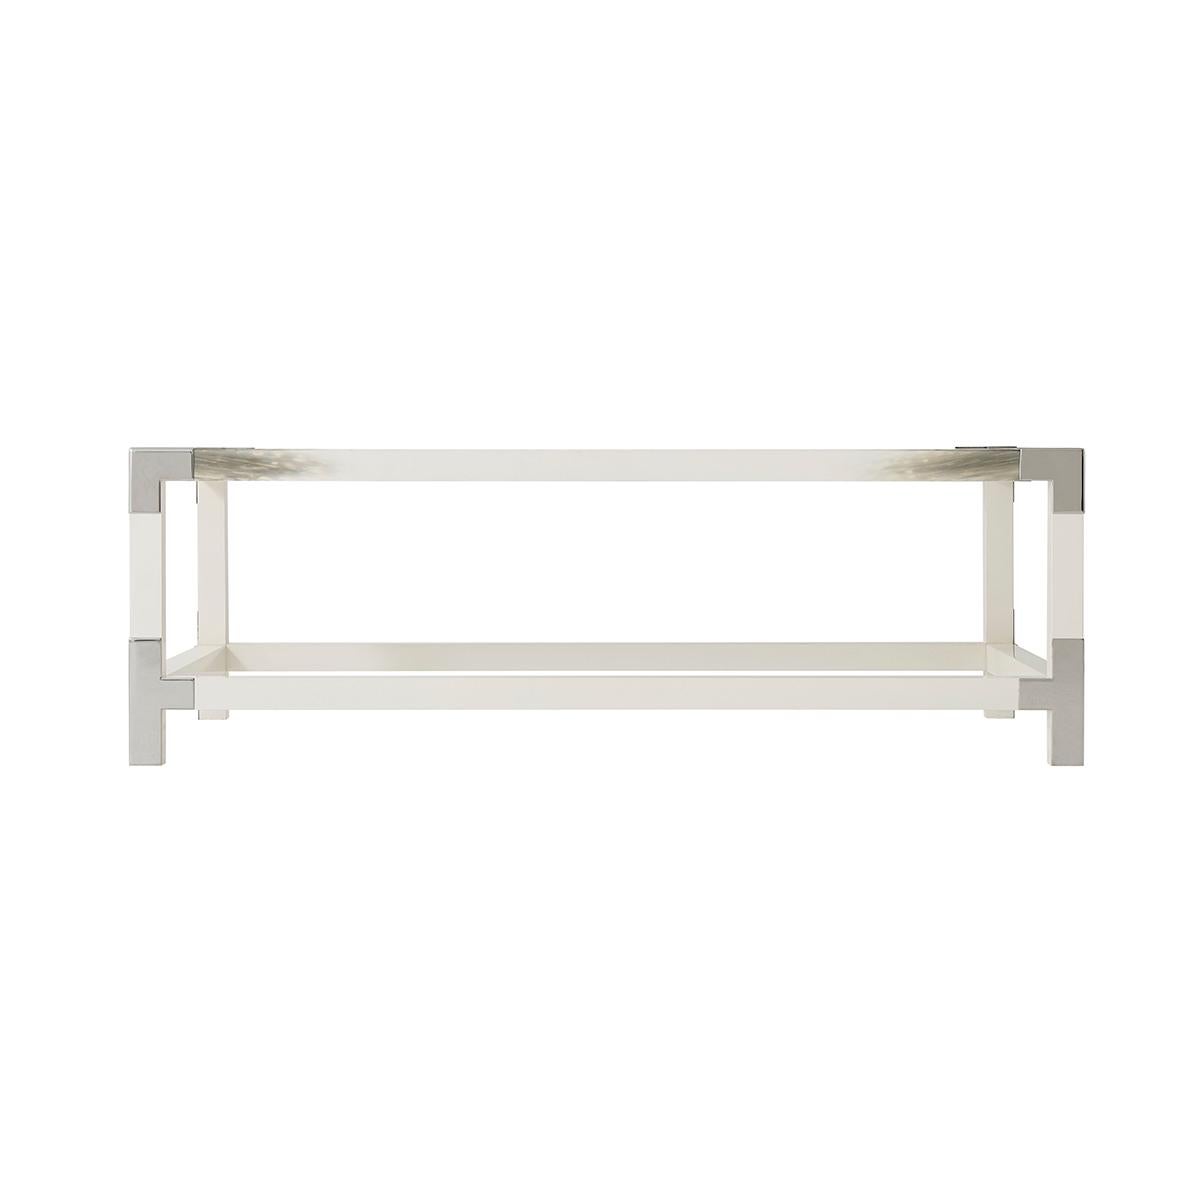 white lacquered and faux horn painted cocktail table, the rectangular glass inset top with brass edged corners, on square legs joined by stretchers.

Dimensions: 54